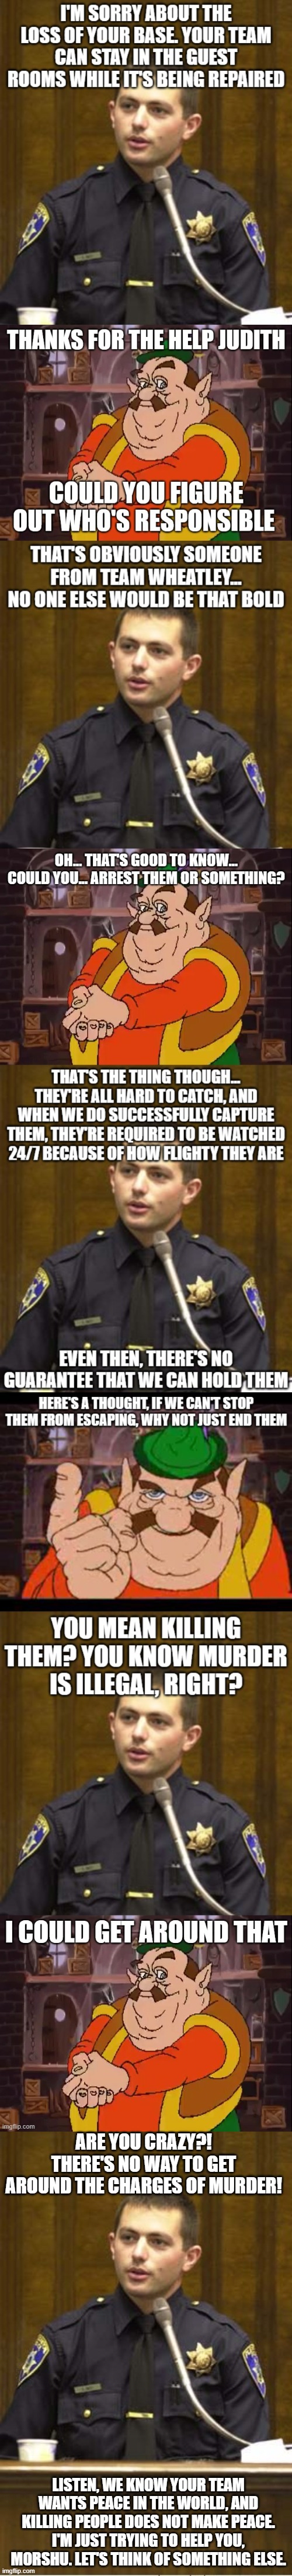 Also how can Morshu "get around it?" | ARE YOU CRAZY?! THERE'S NO WAY TO GET AROUND THE CHARGES OF MURDER! LISTEN, WE KNOW YOUR TEAM WANTS PEACE IN THE WORLD, AND KILLING PEOPLE DOES NOT MAKE PEACE. I'M JUST TRYING TO HELP YOU, MORSHU. LET'S THINK OF SOMETHING ELSE. | image tagged in memes,police officer testifying | made w/ Imgflip meme maker